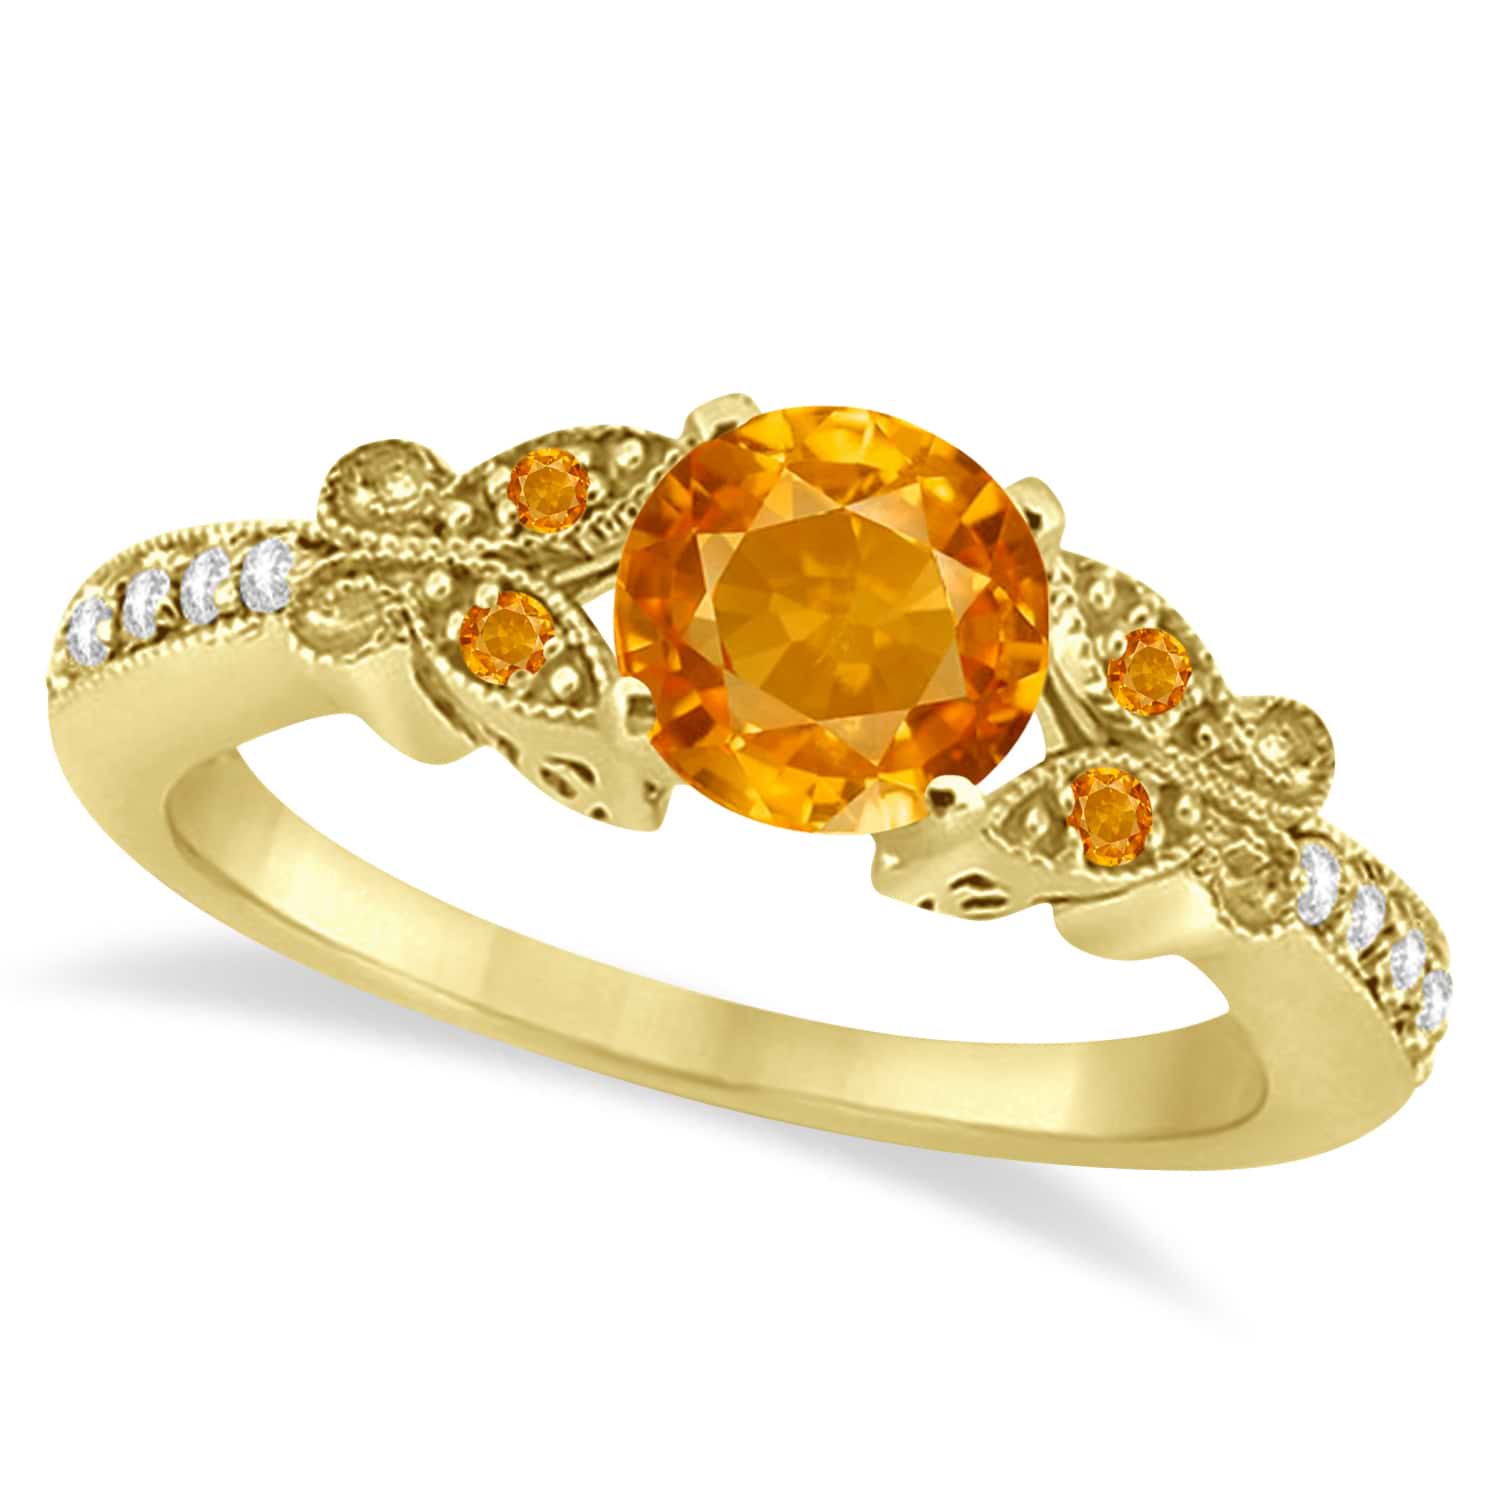 Butterfly Genuine Citrine & Diamond Engagement Ring 18K Yellow Gold 1.28ct